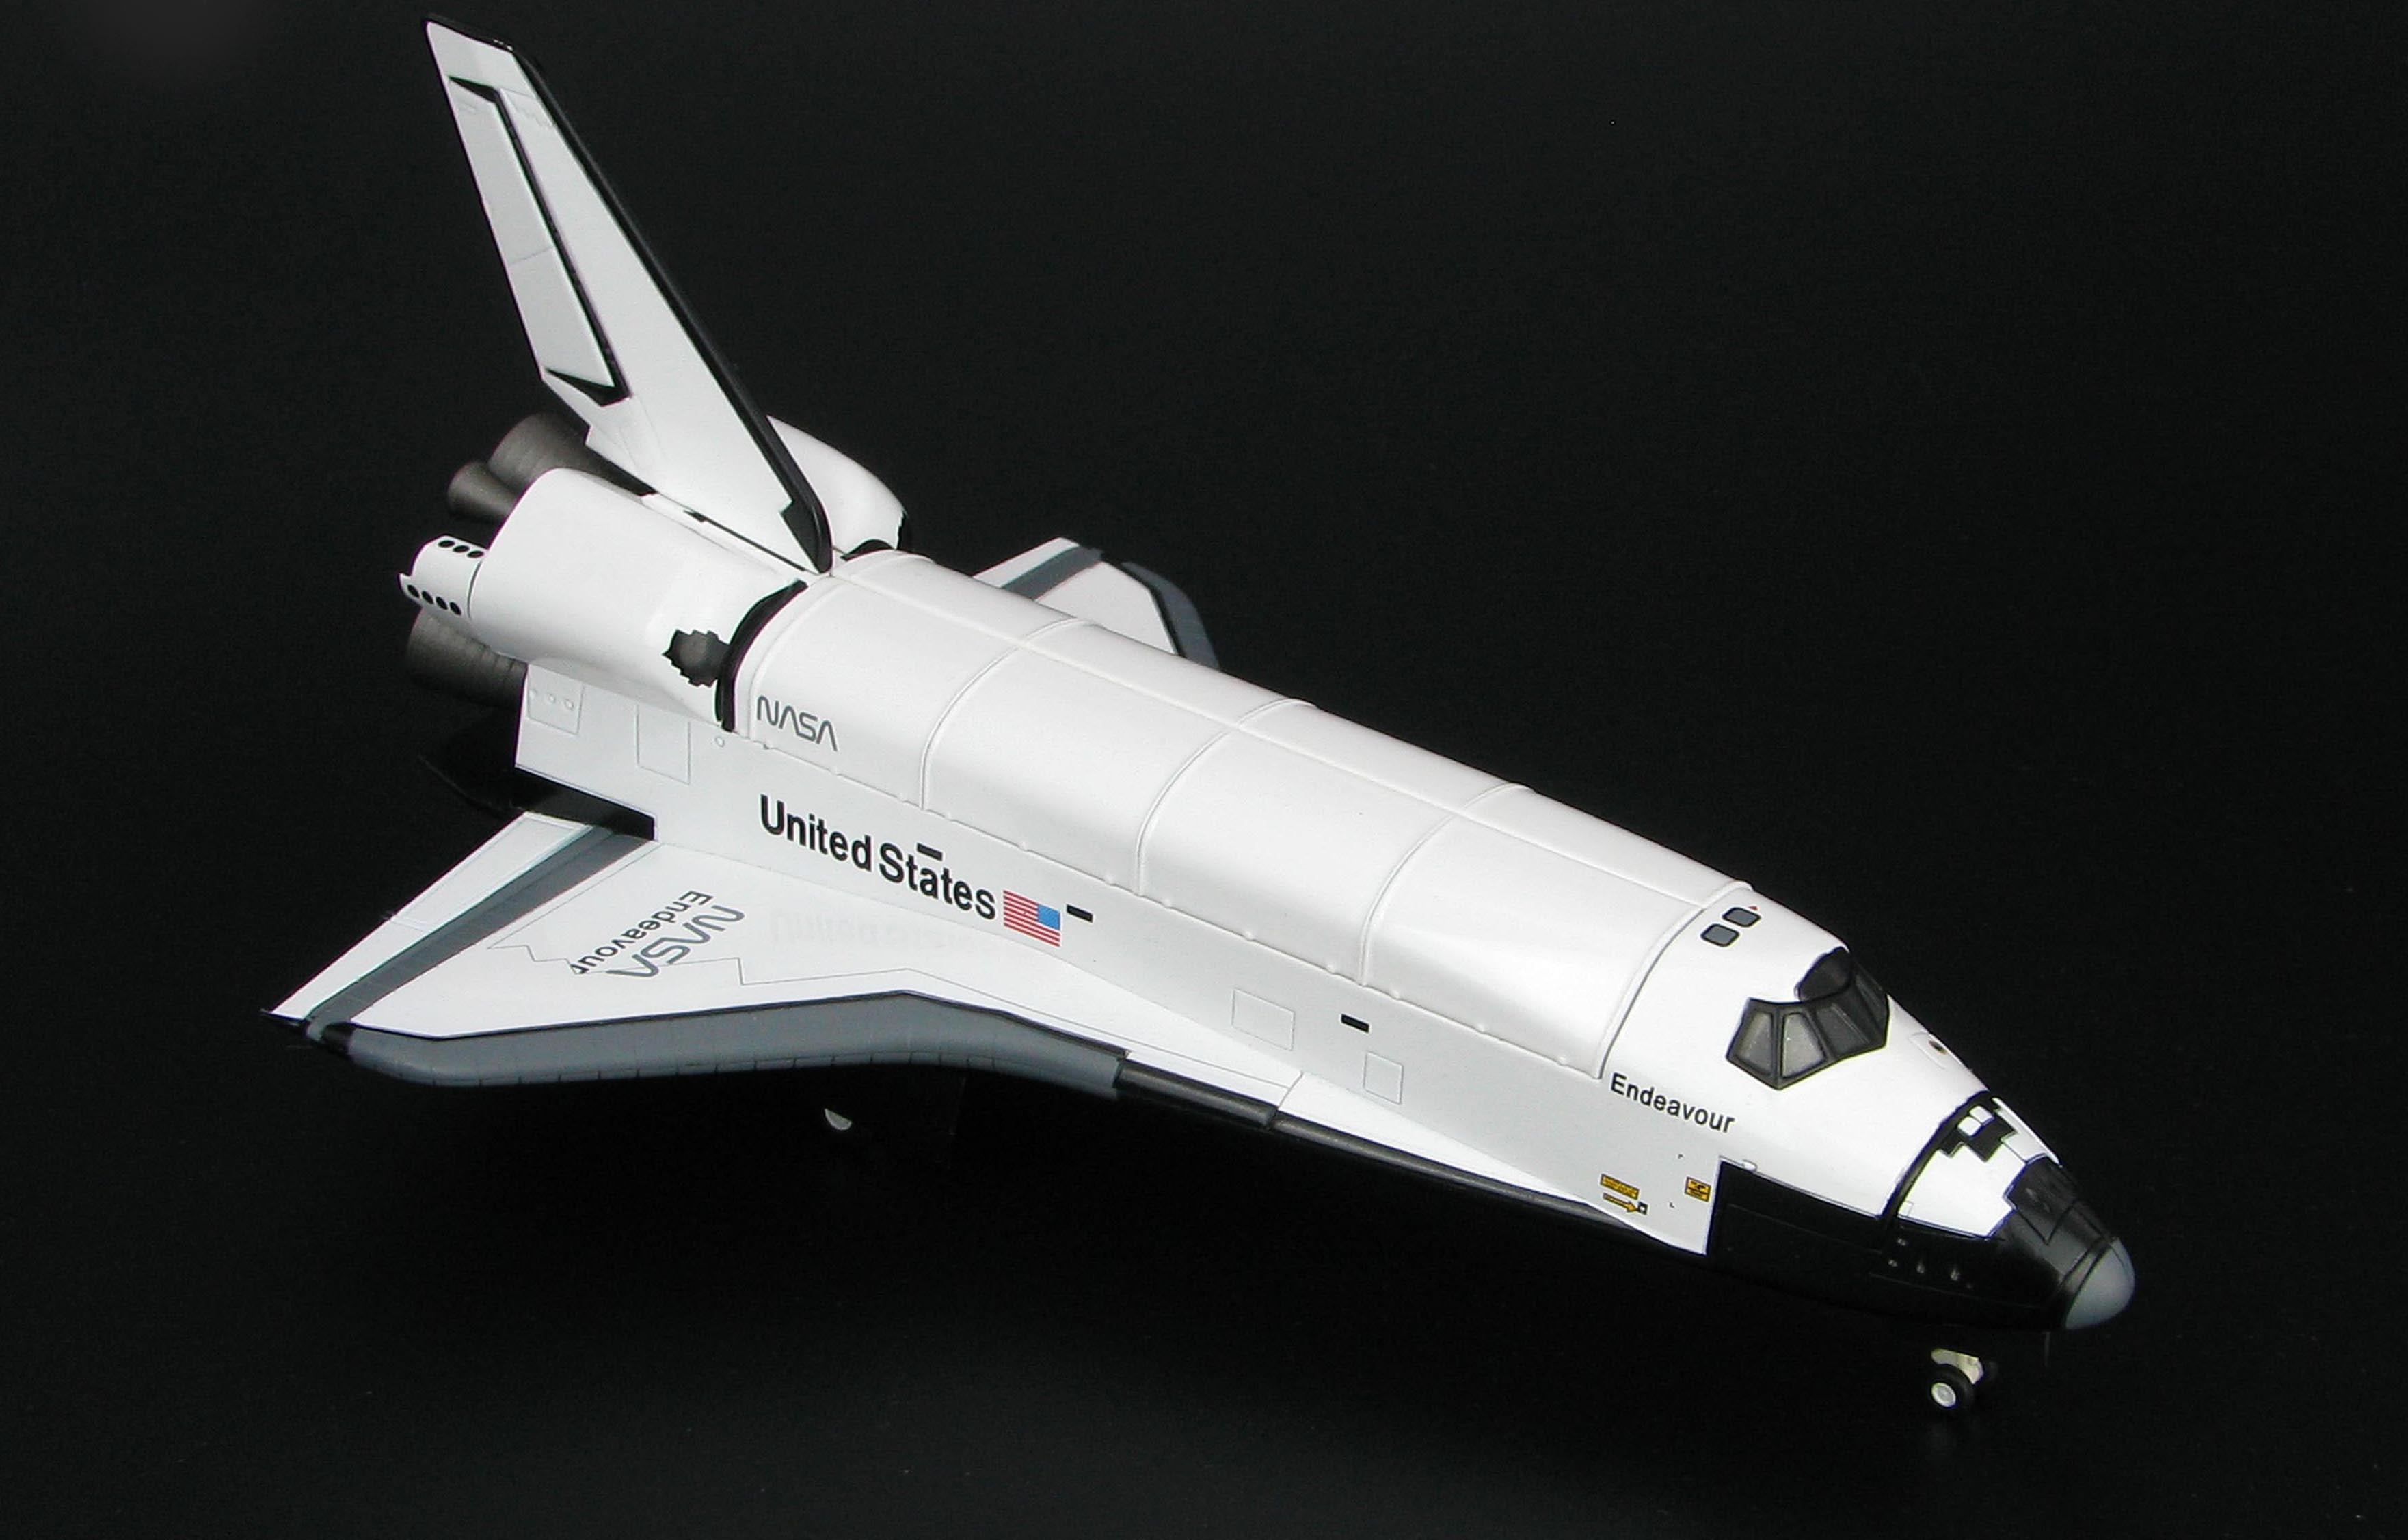 NASA SPACE SHUTTLE 1:200 SCALE MODEL KIT-100# PAPER MODEL AIRPLANE Set of 5